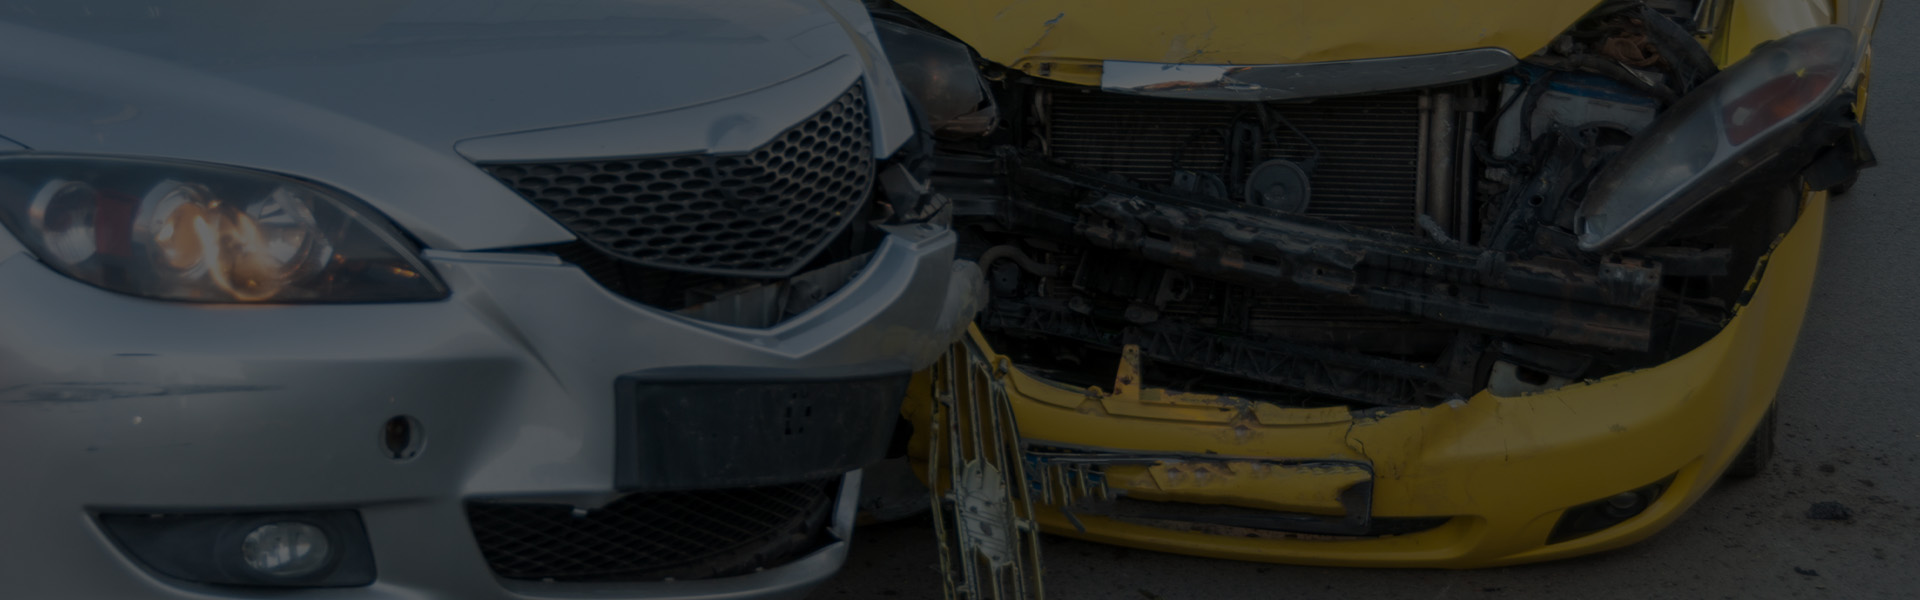 Taxi Accidents | Injury Law Partners - Personal Injury Lawyers